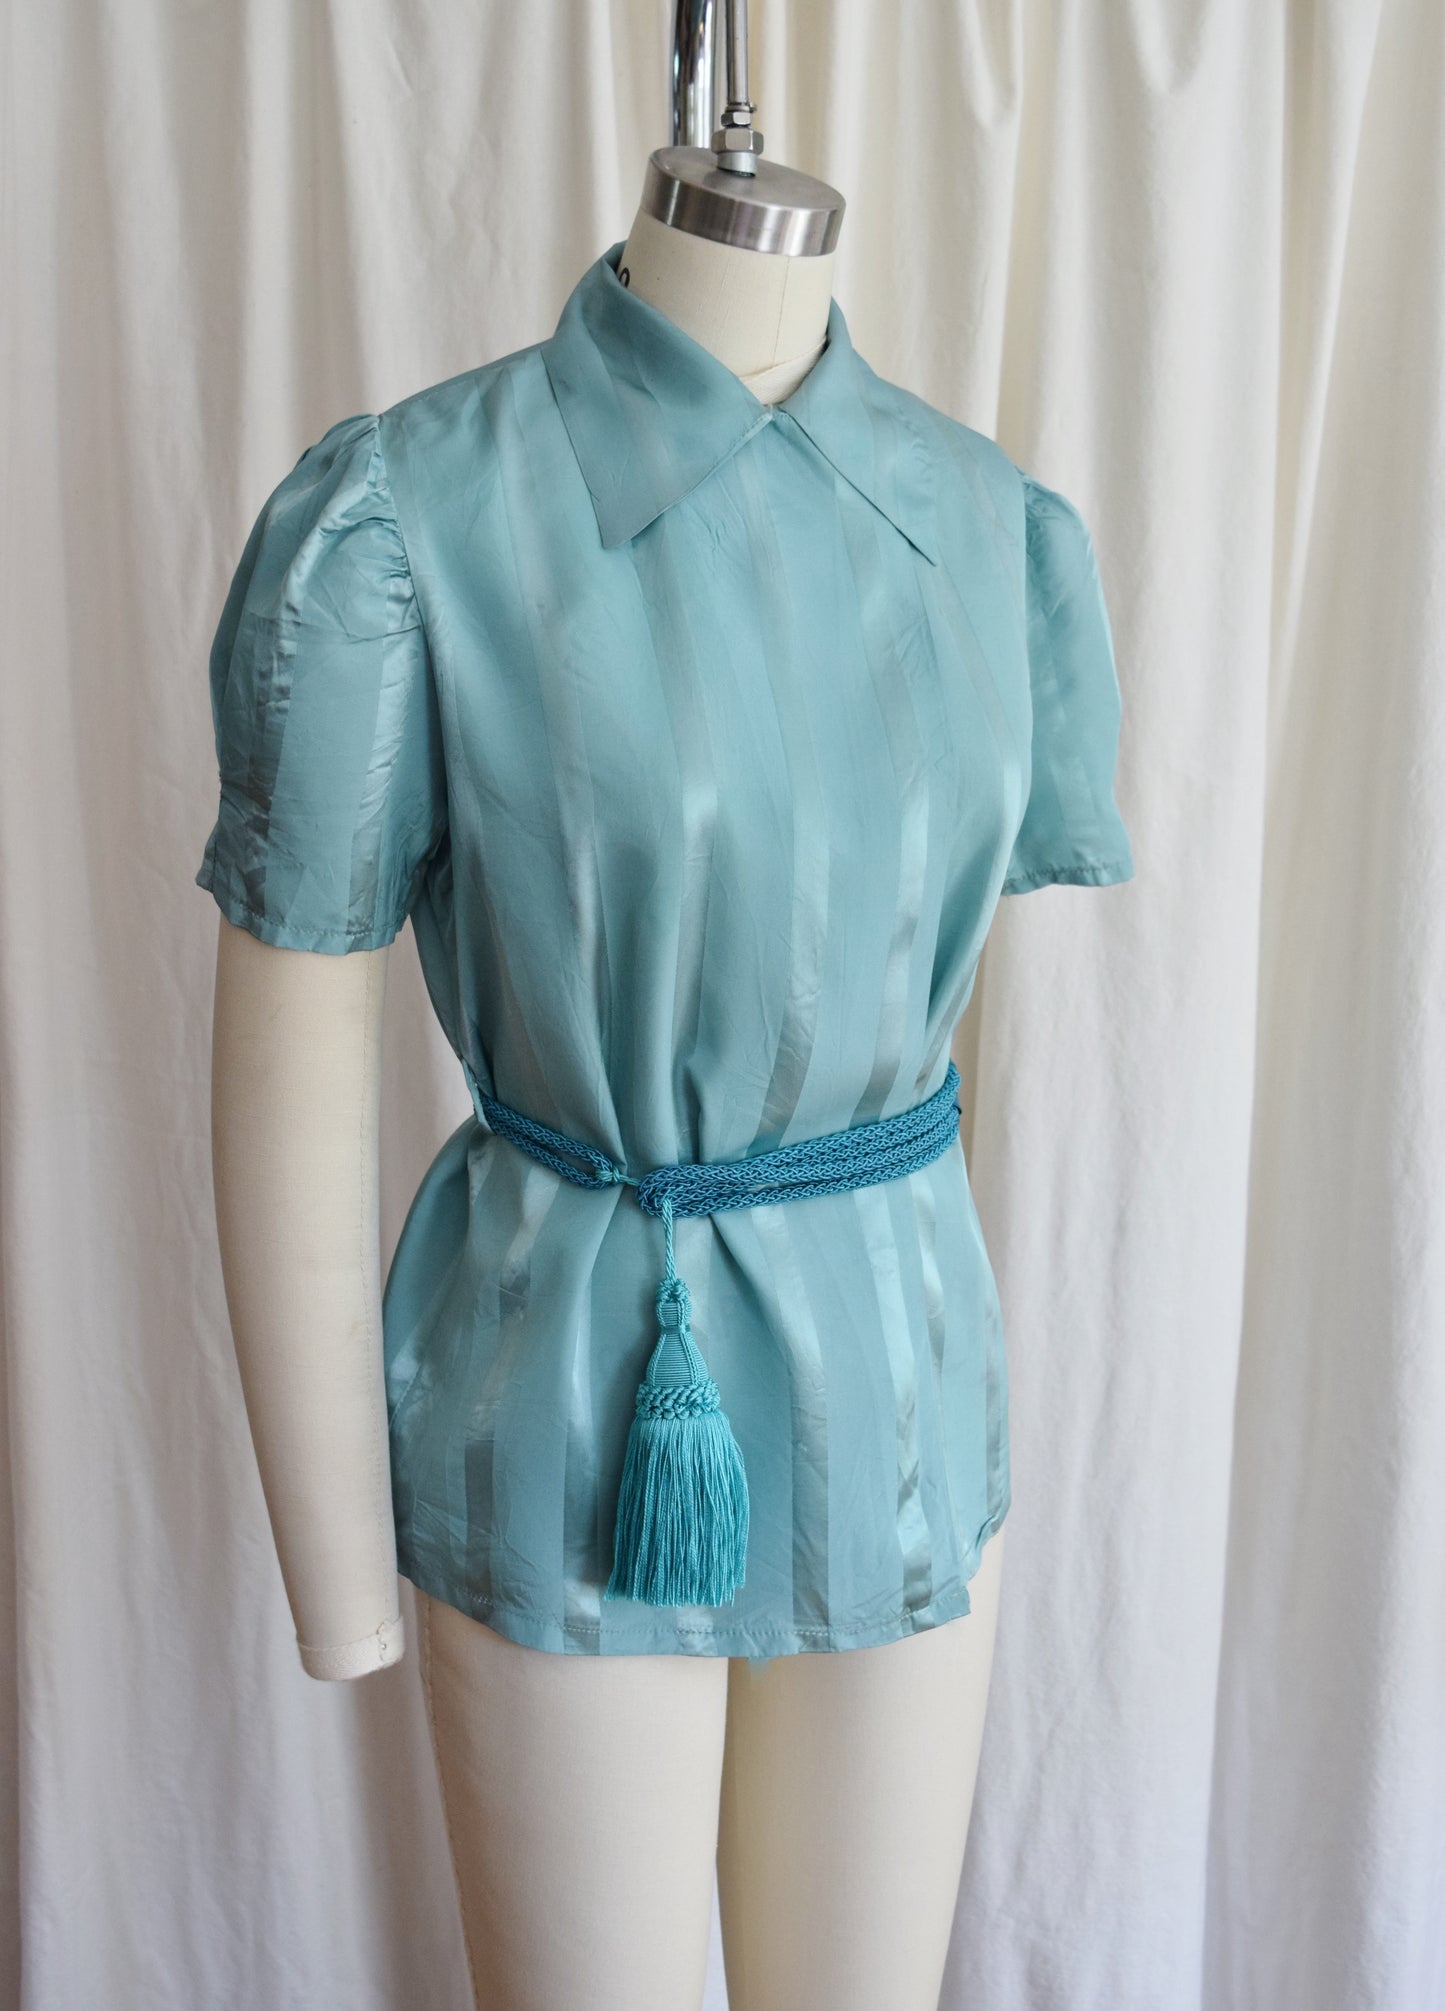 1940s Striped Teal Wrap Top / Loungewear Blouse with Belt